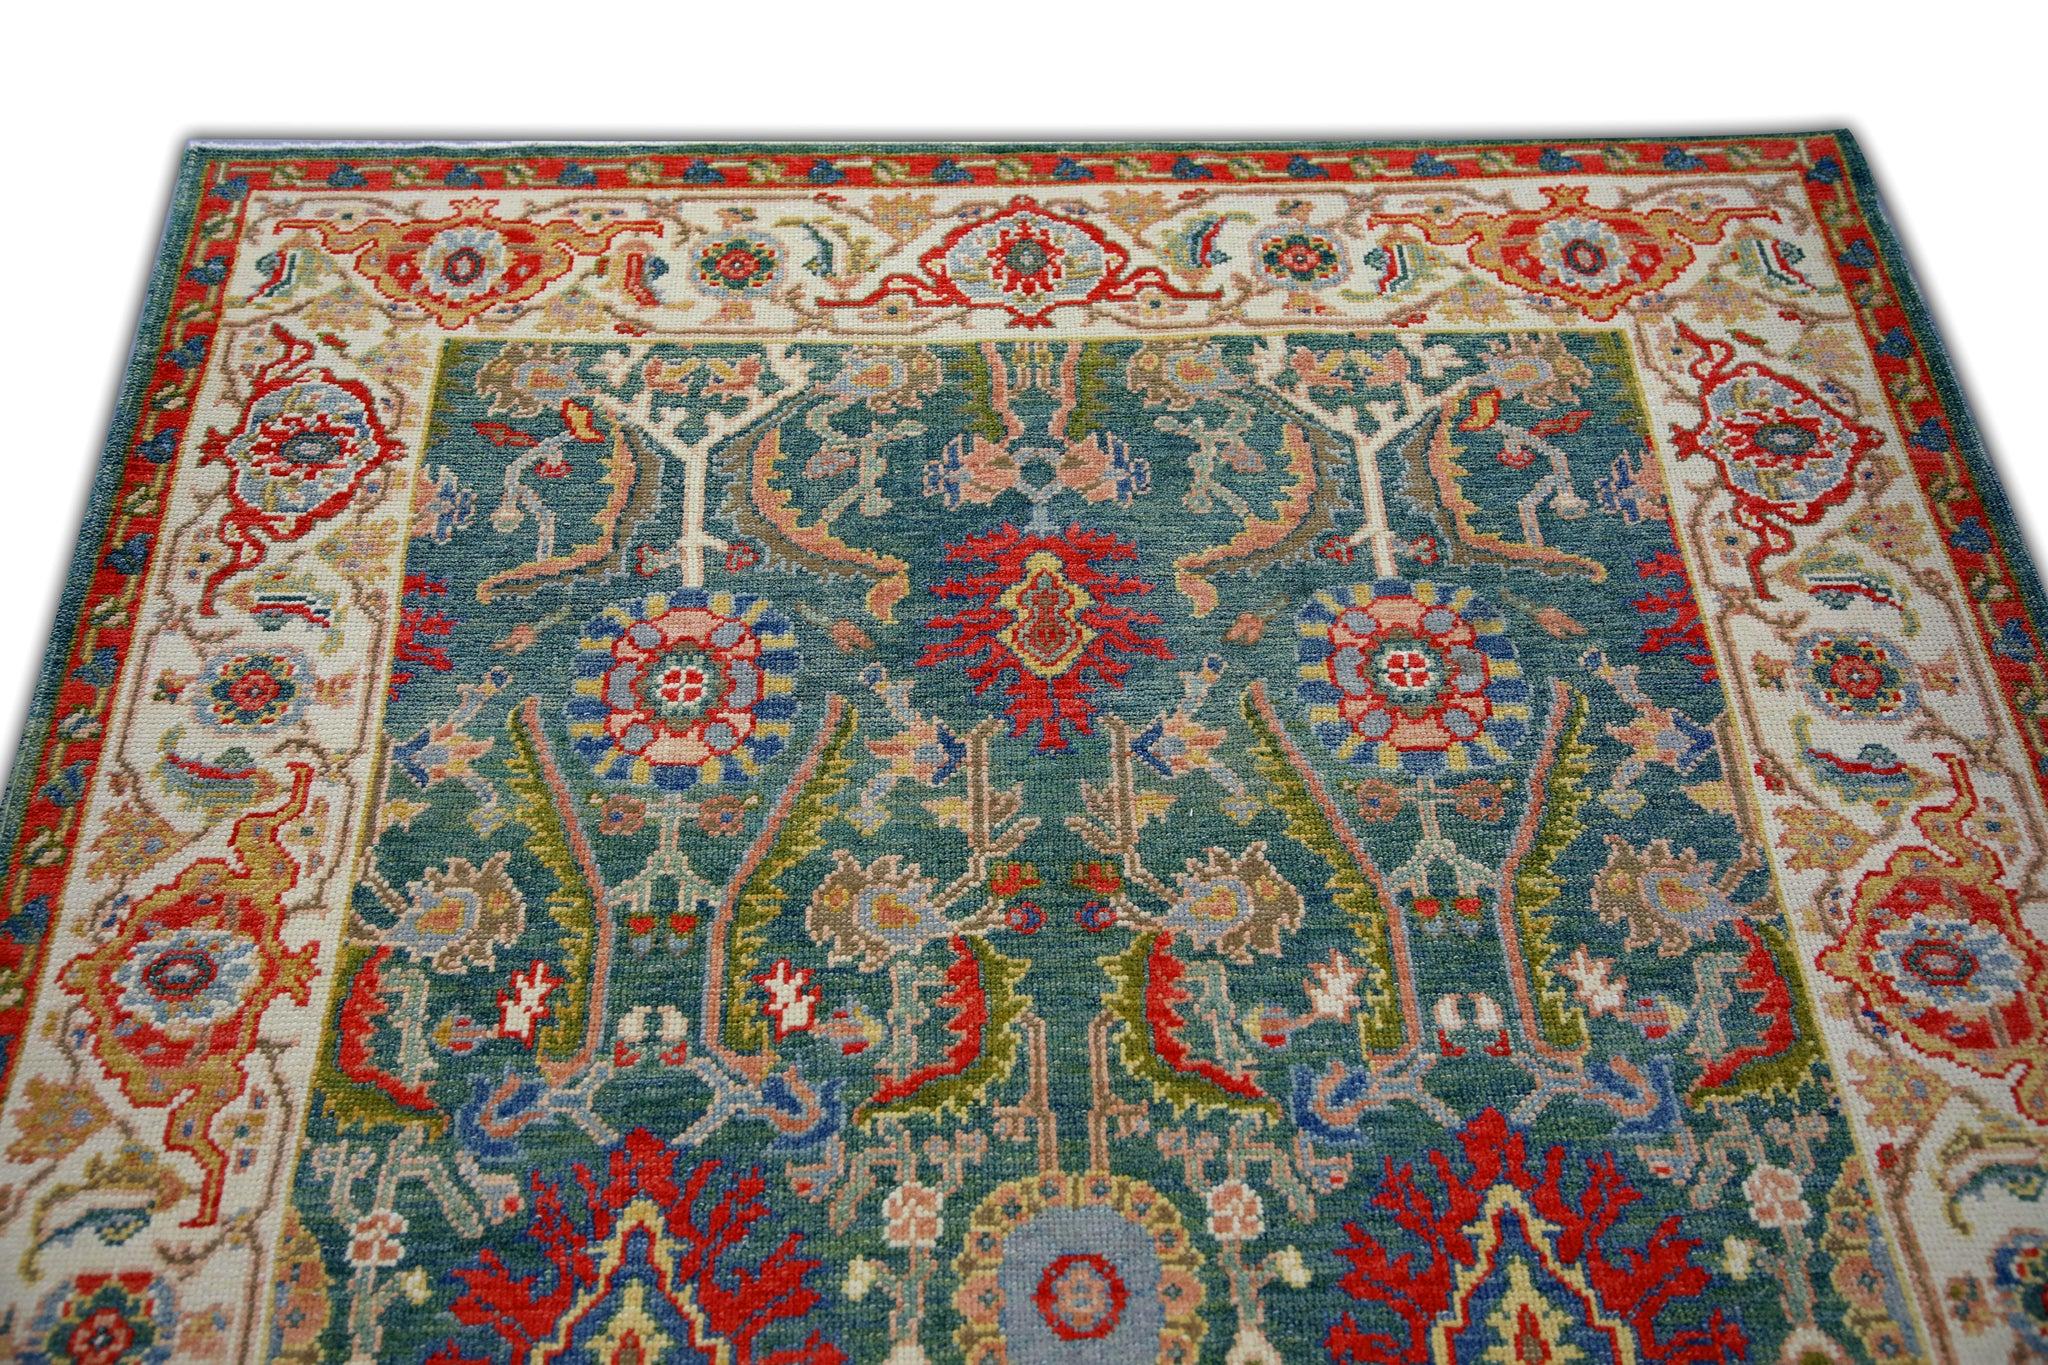 Green & Red Floral Design Handwoven Wool Turkish Finewoven Oushak Rug 4'3 x 6'7 In New Condition For Sale In Houston, TX